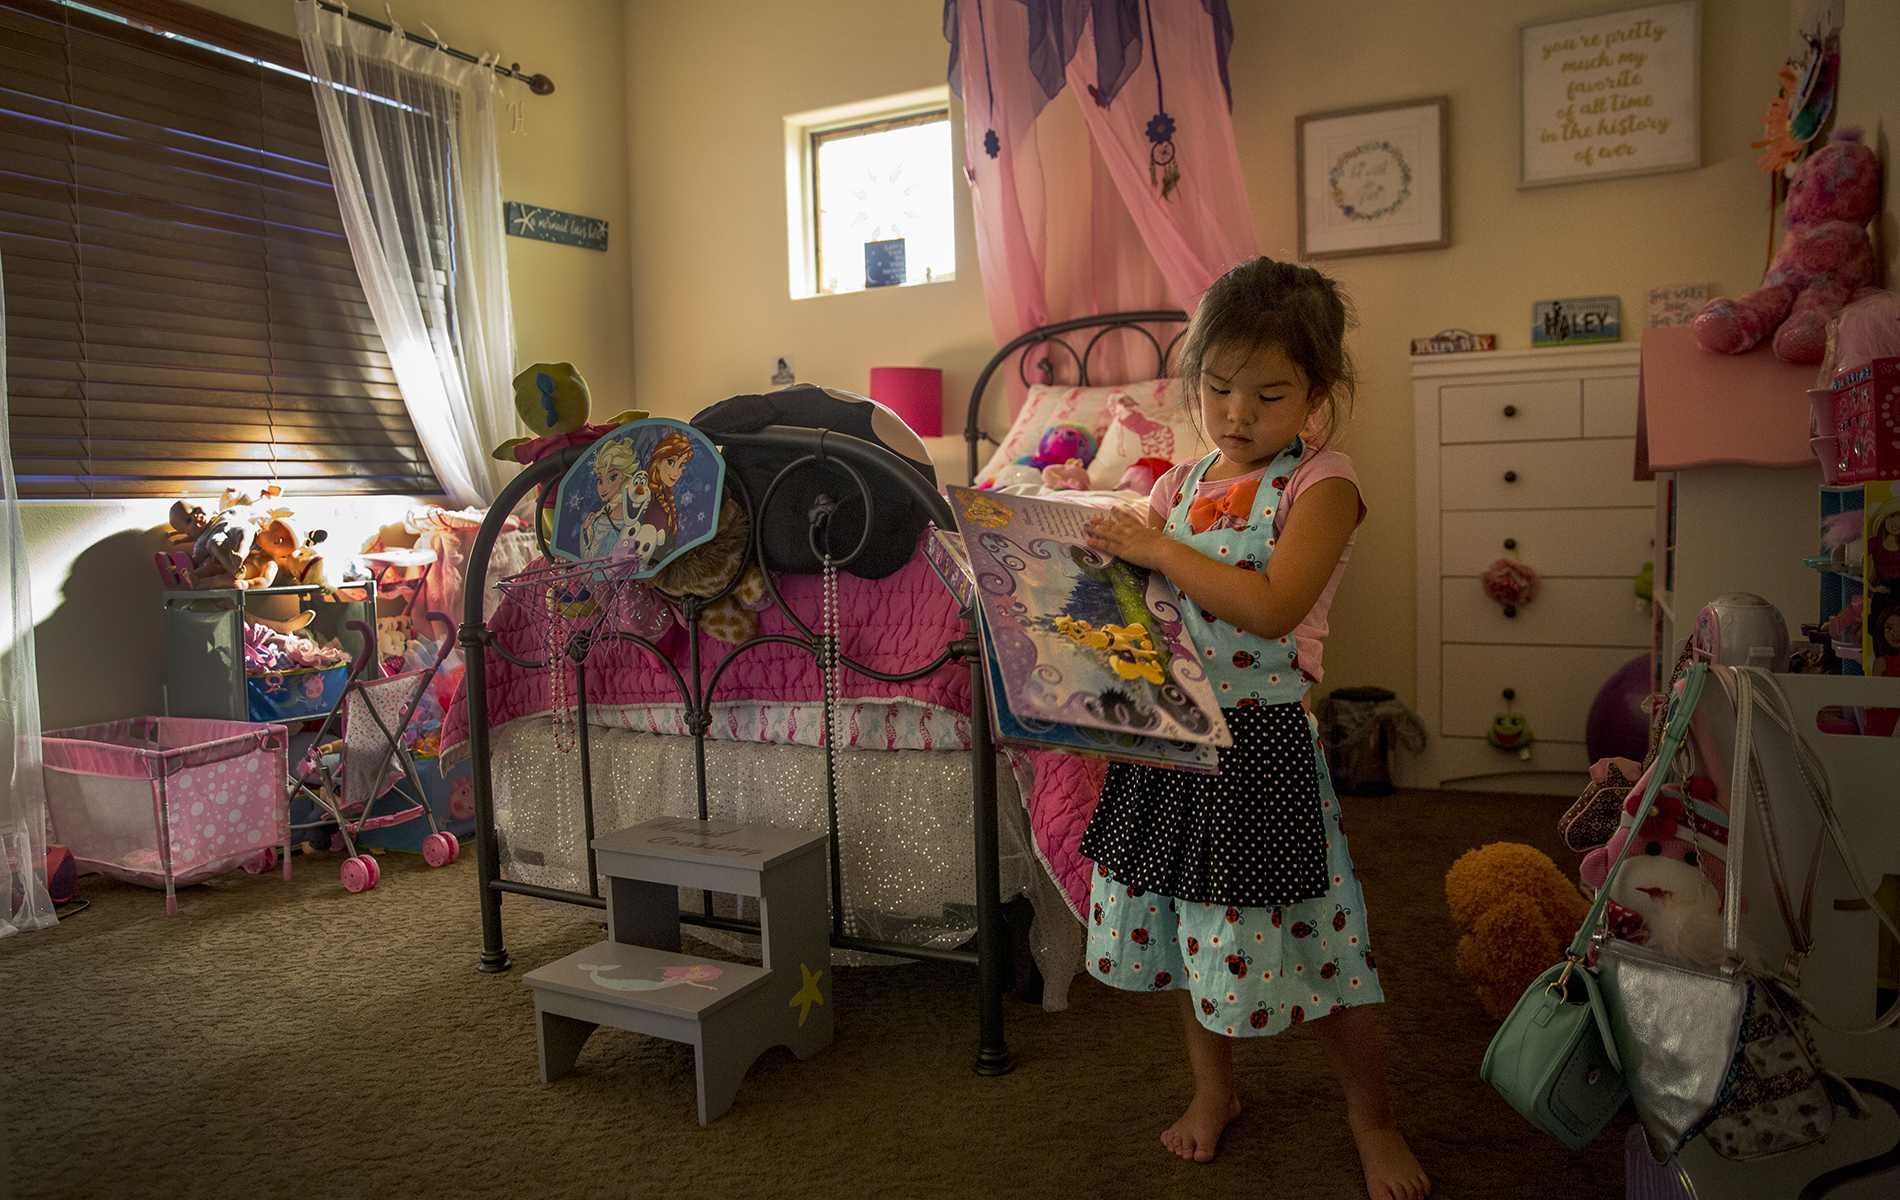 Haley Welch, 4, reads a book in her bedroom.